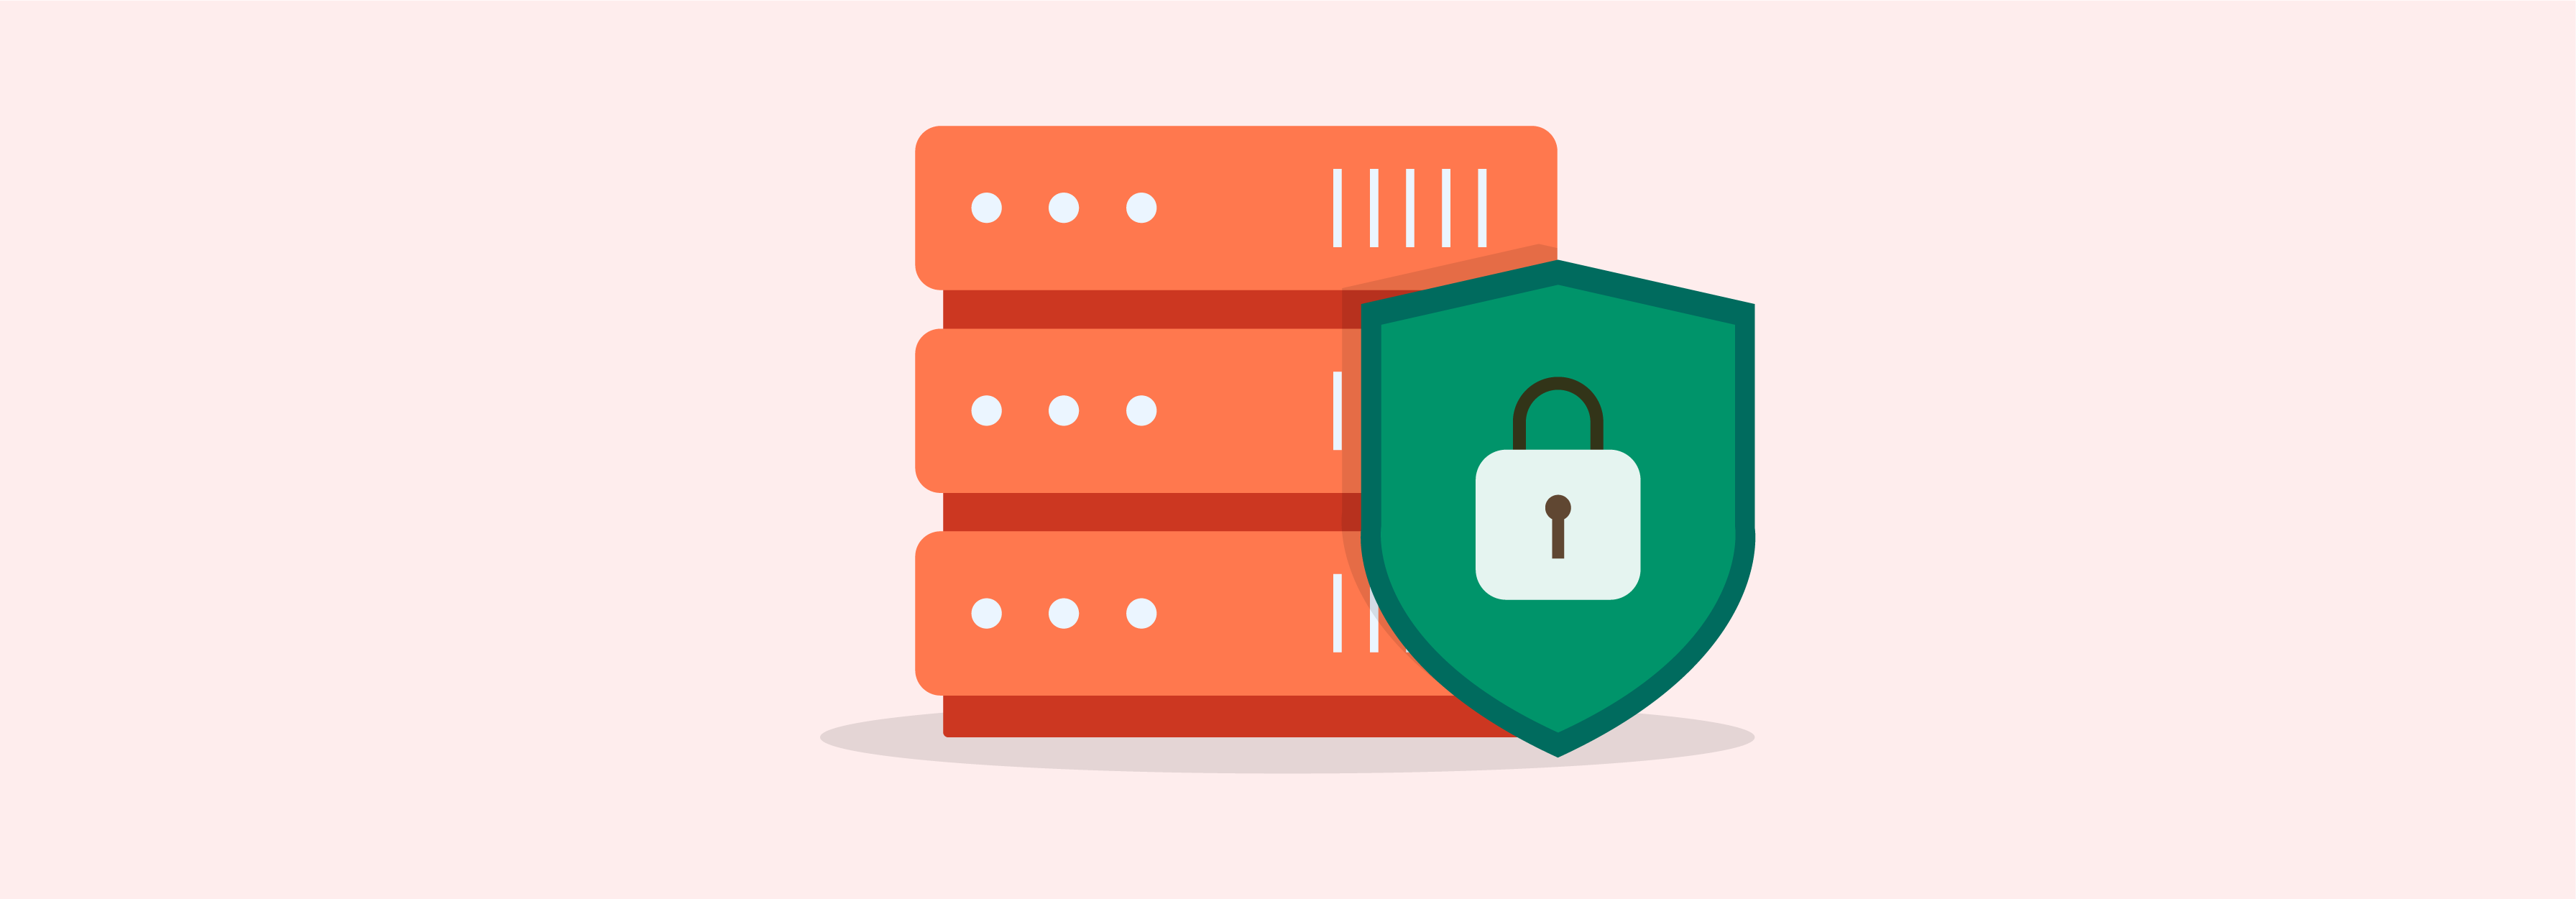 Key features of secure and reliable hosting for Magento stores